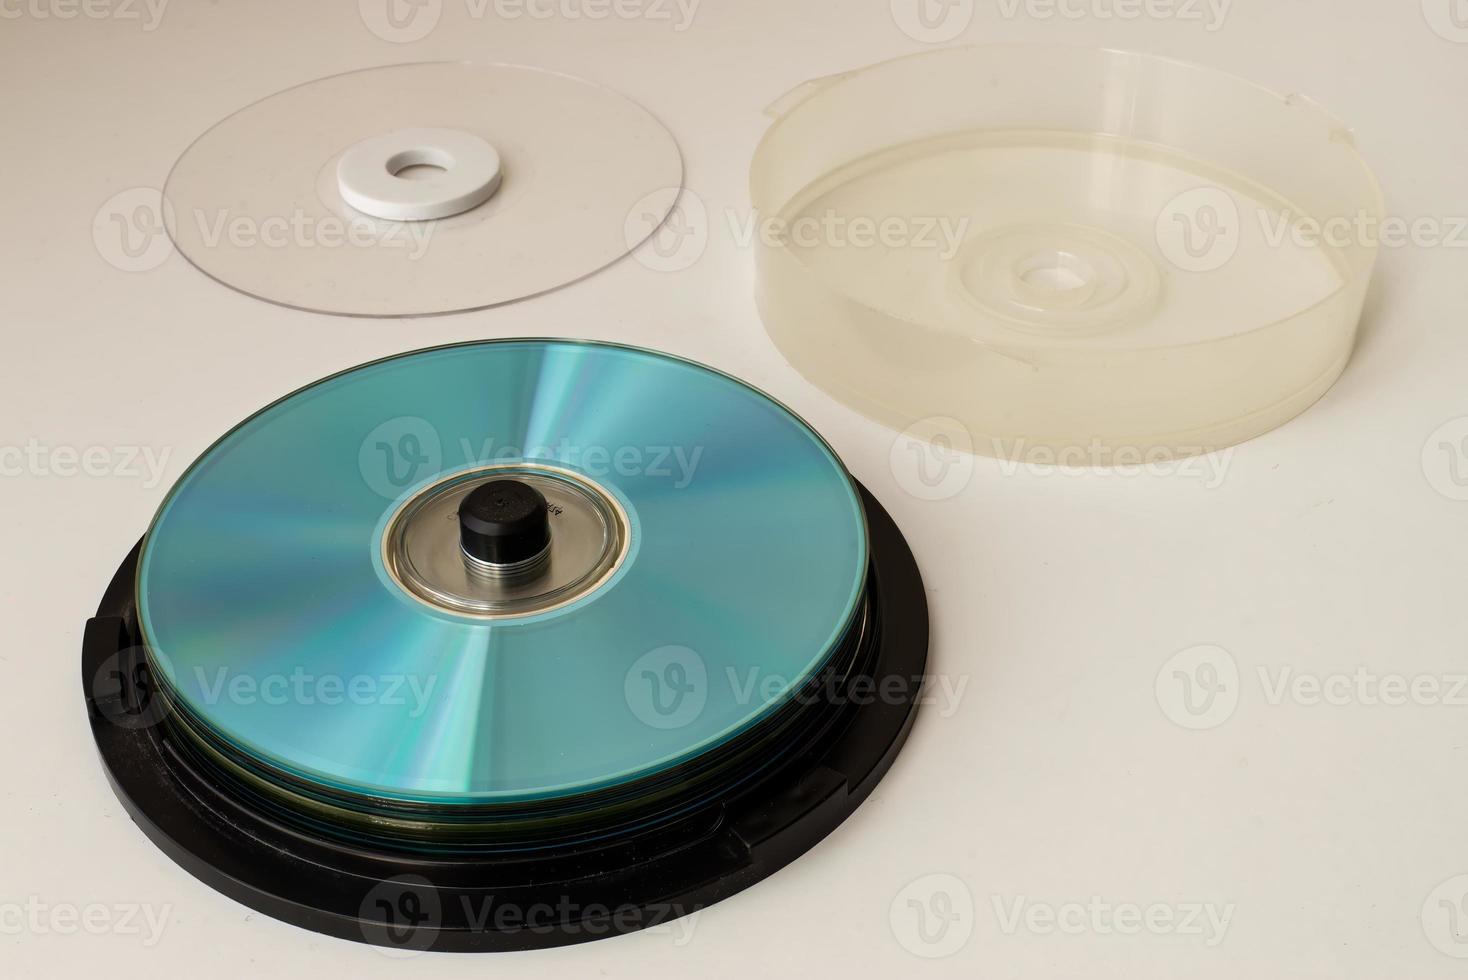 Plastic CD and DVD container on white background. Technology from the 90s. photo